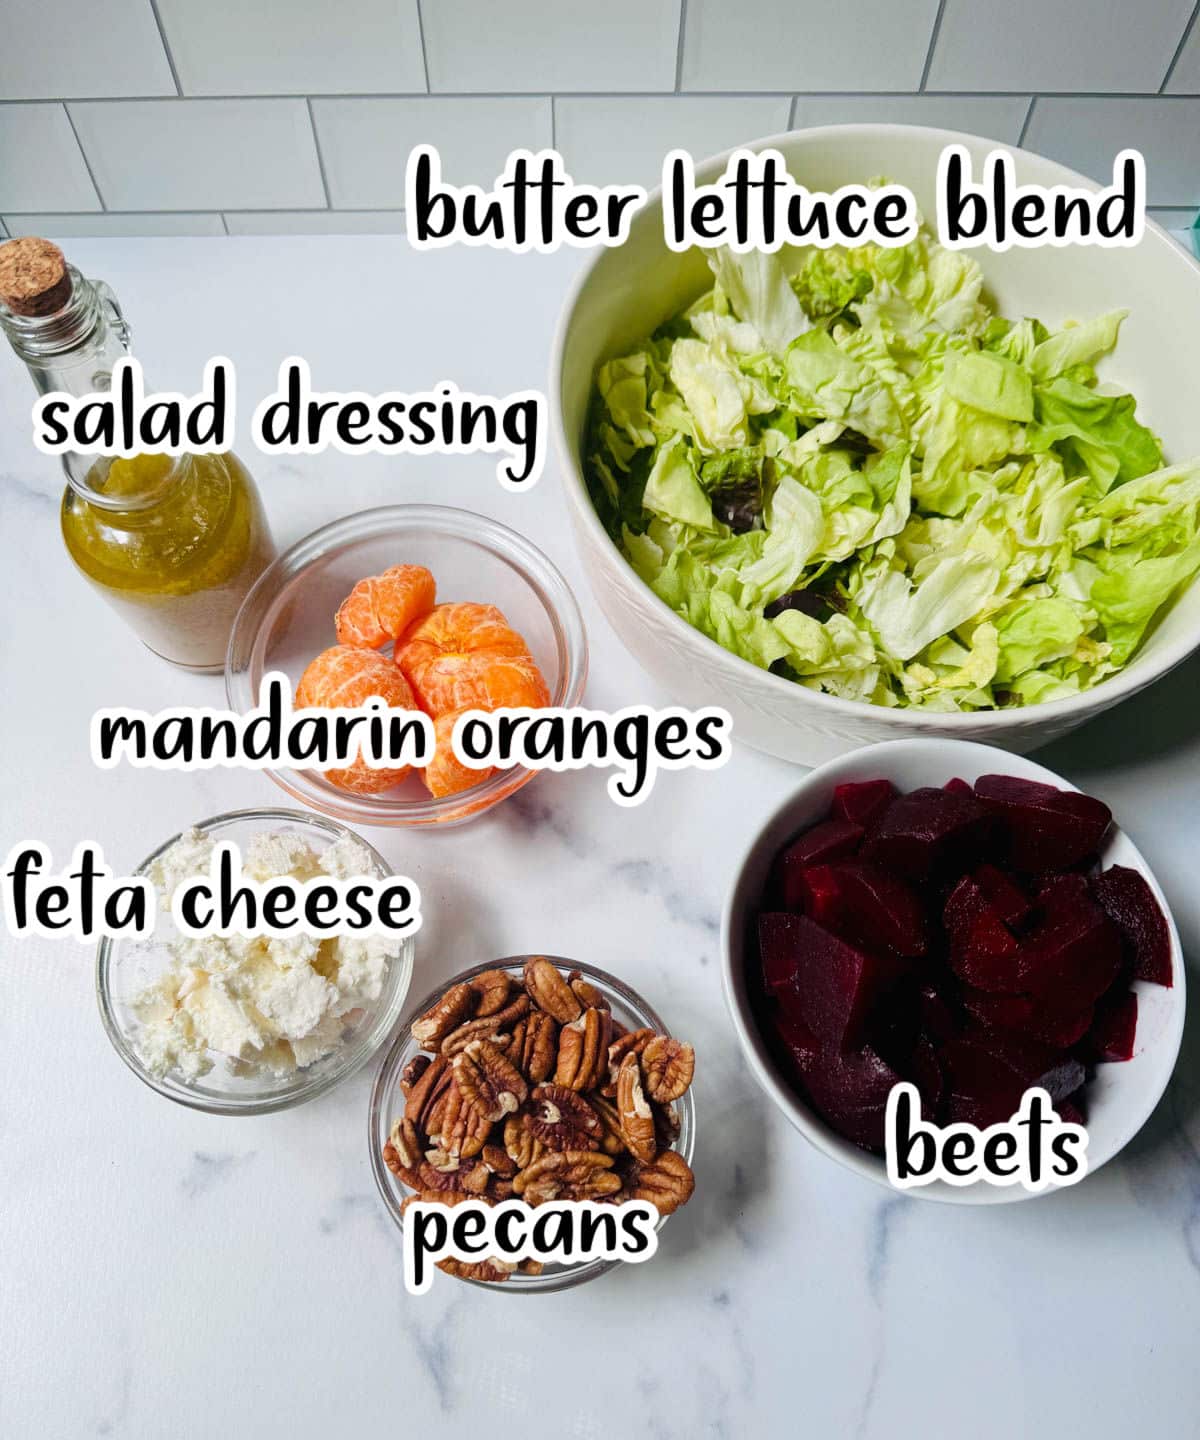 Lettuce, mandarin oranges, bottle of salad dressing, beets, feta cheese and pecans on white counter.